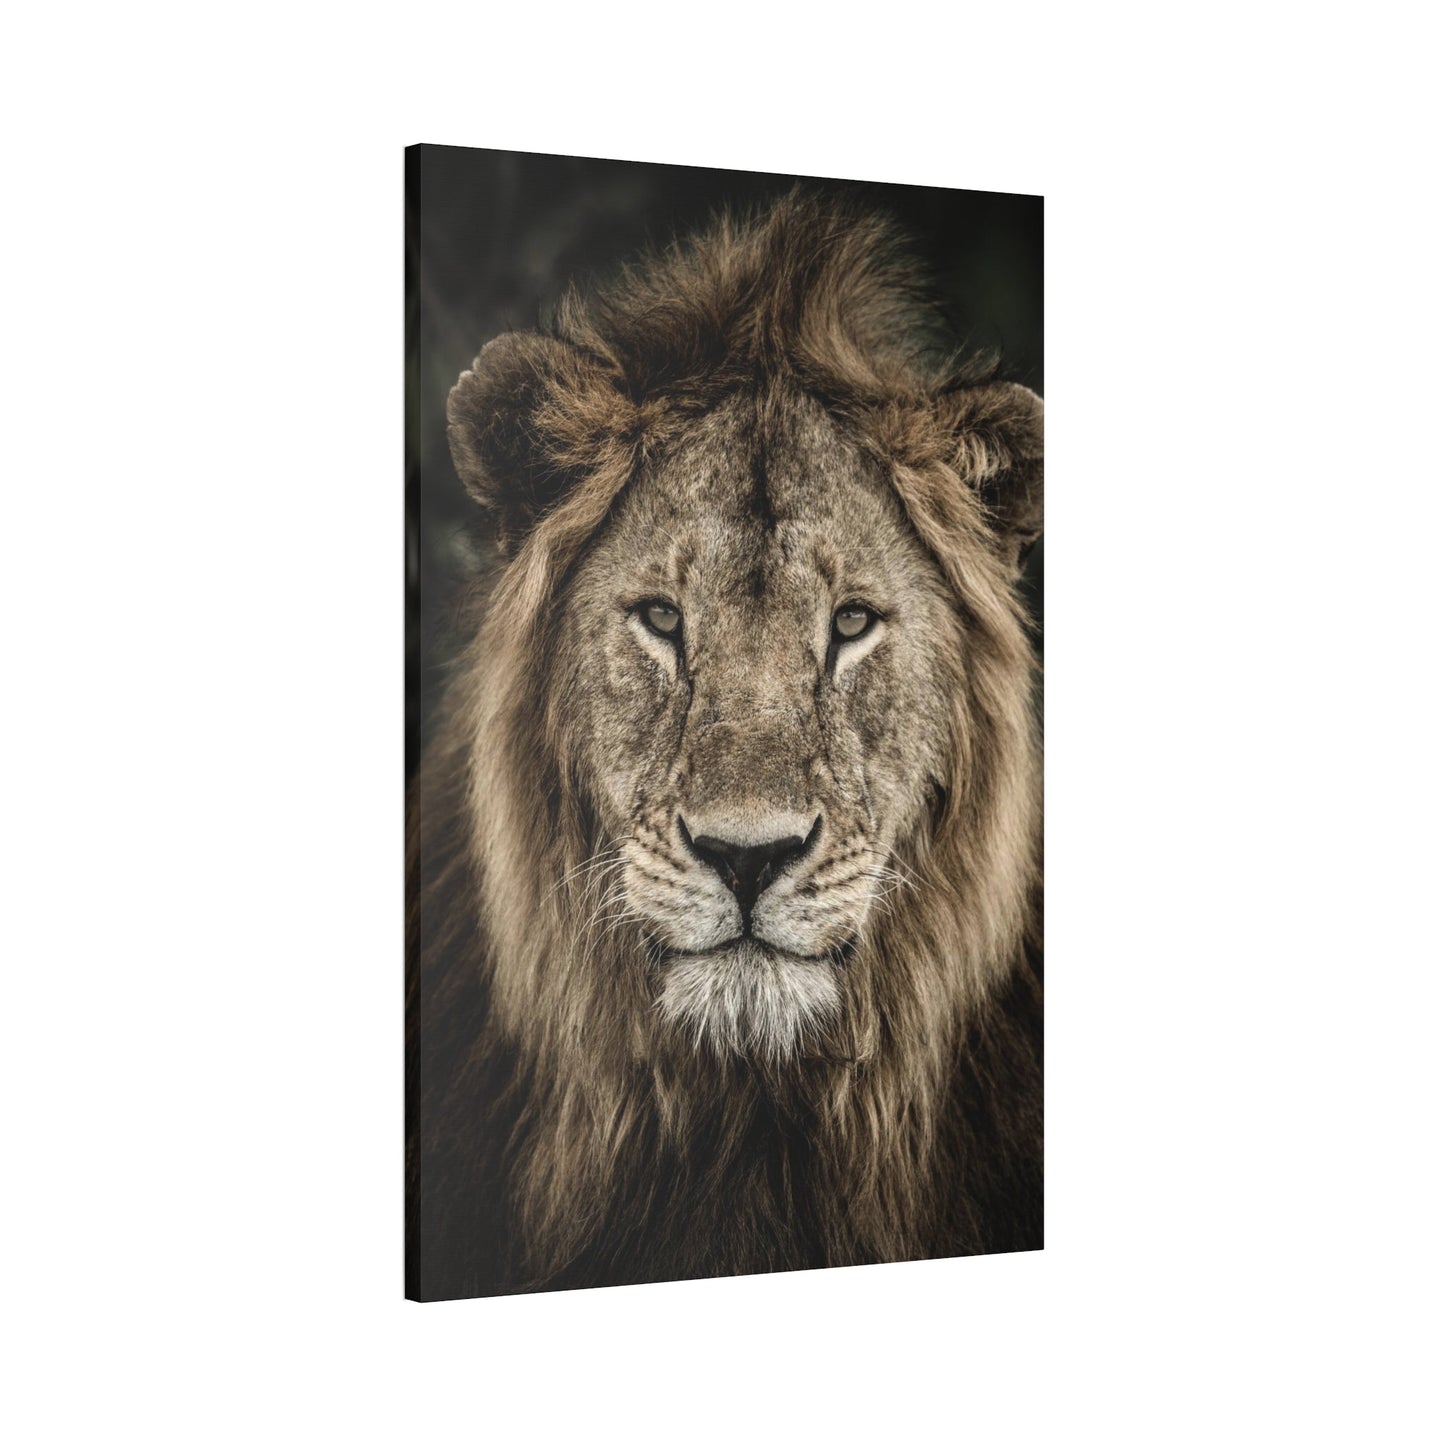 Lion's Strength: Canvas Print of the Fierce Predator in Action